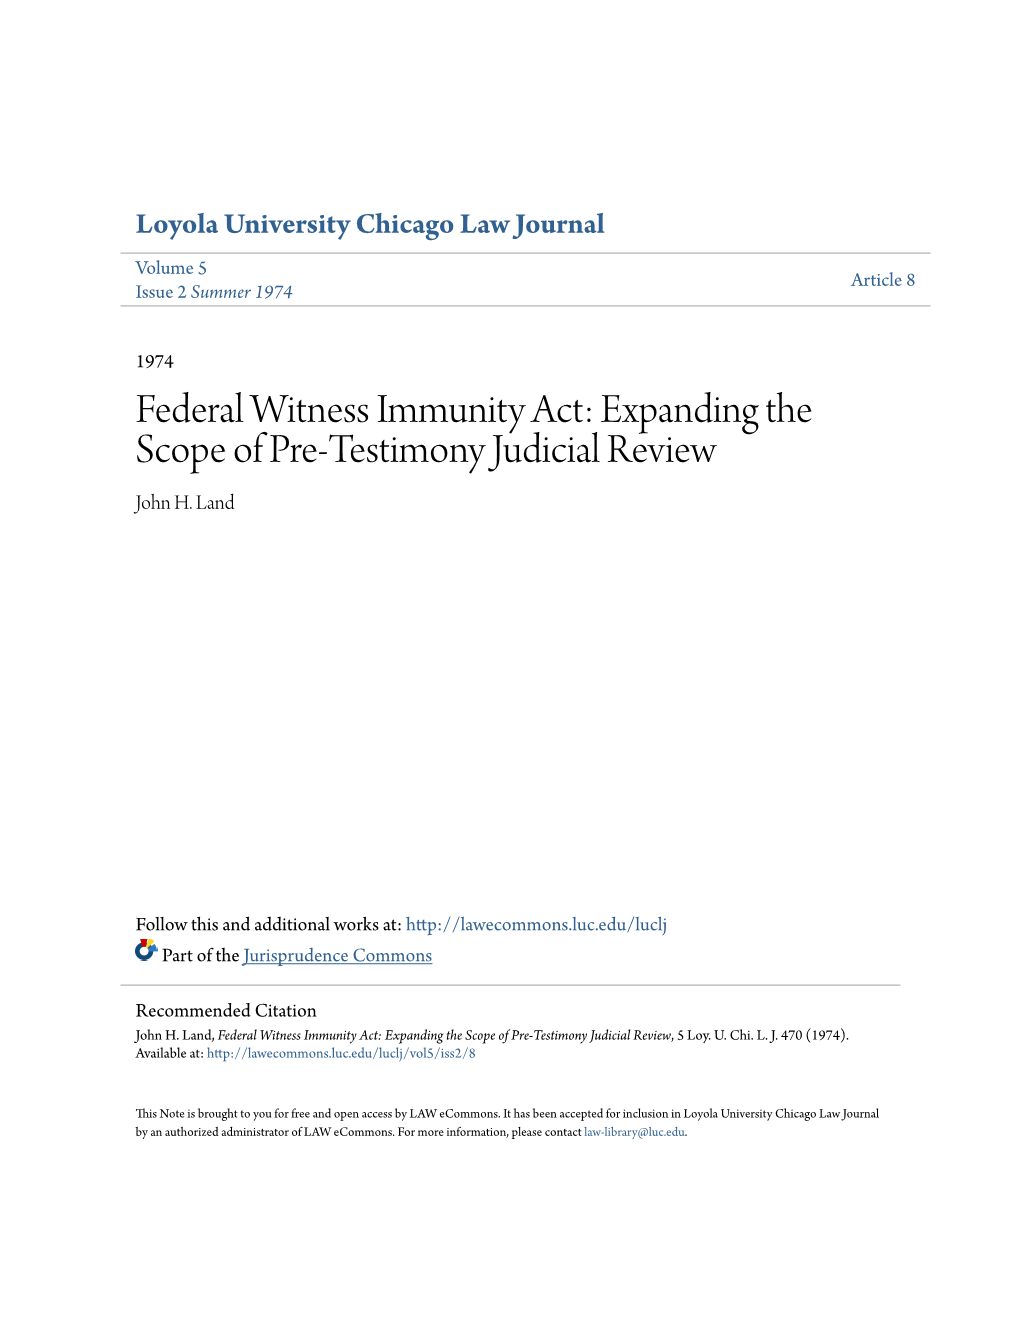 Federal Witness Immunity Act: Expanding the Scope of Pre-Testimony Judicial Review John H